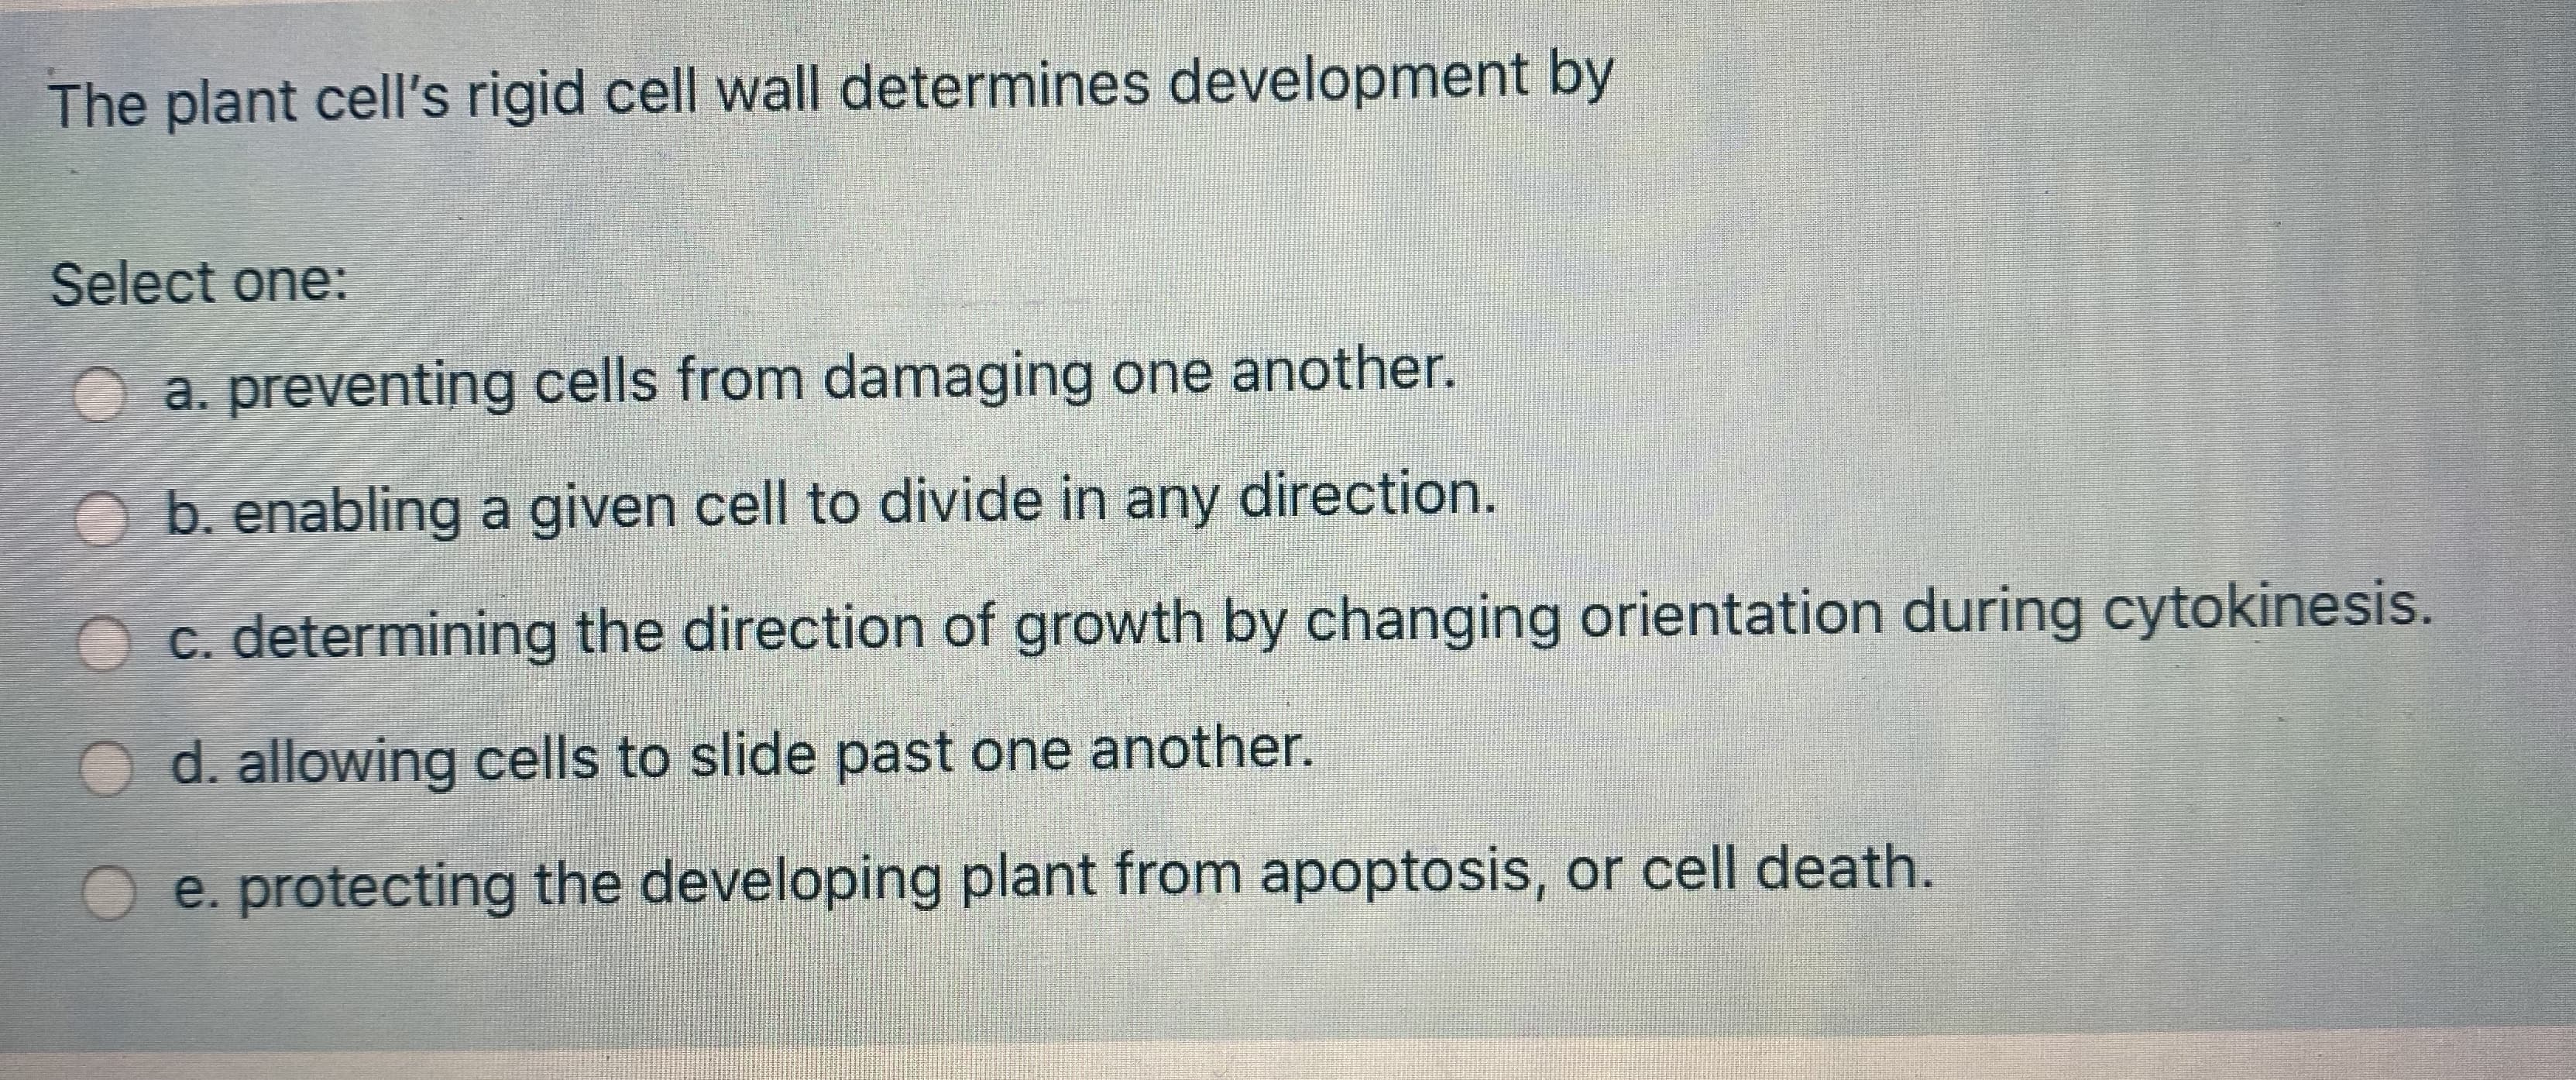 The plant cell's rigid cell wall determines development by
